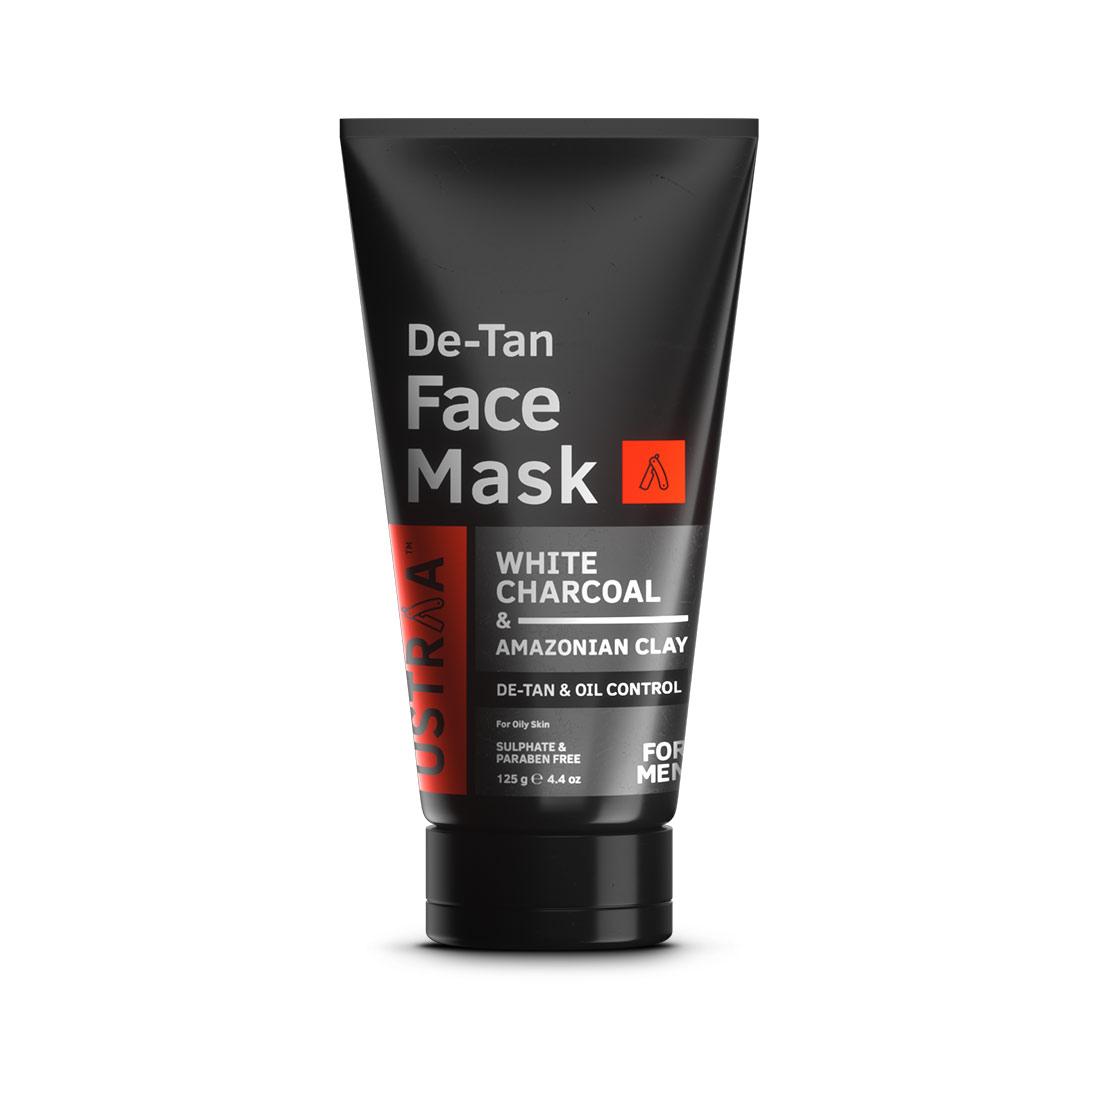 Ustraa De Tan Face Mask for Men with Oily Skin 125 g - For Tan Removal and Even Skin Tone with White Charcoal, Aloe Vera, Kaolin Clay and Olive Oil